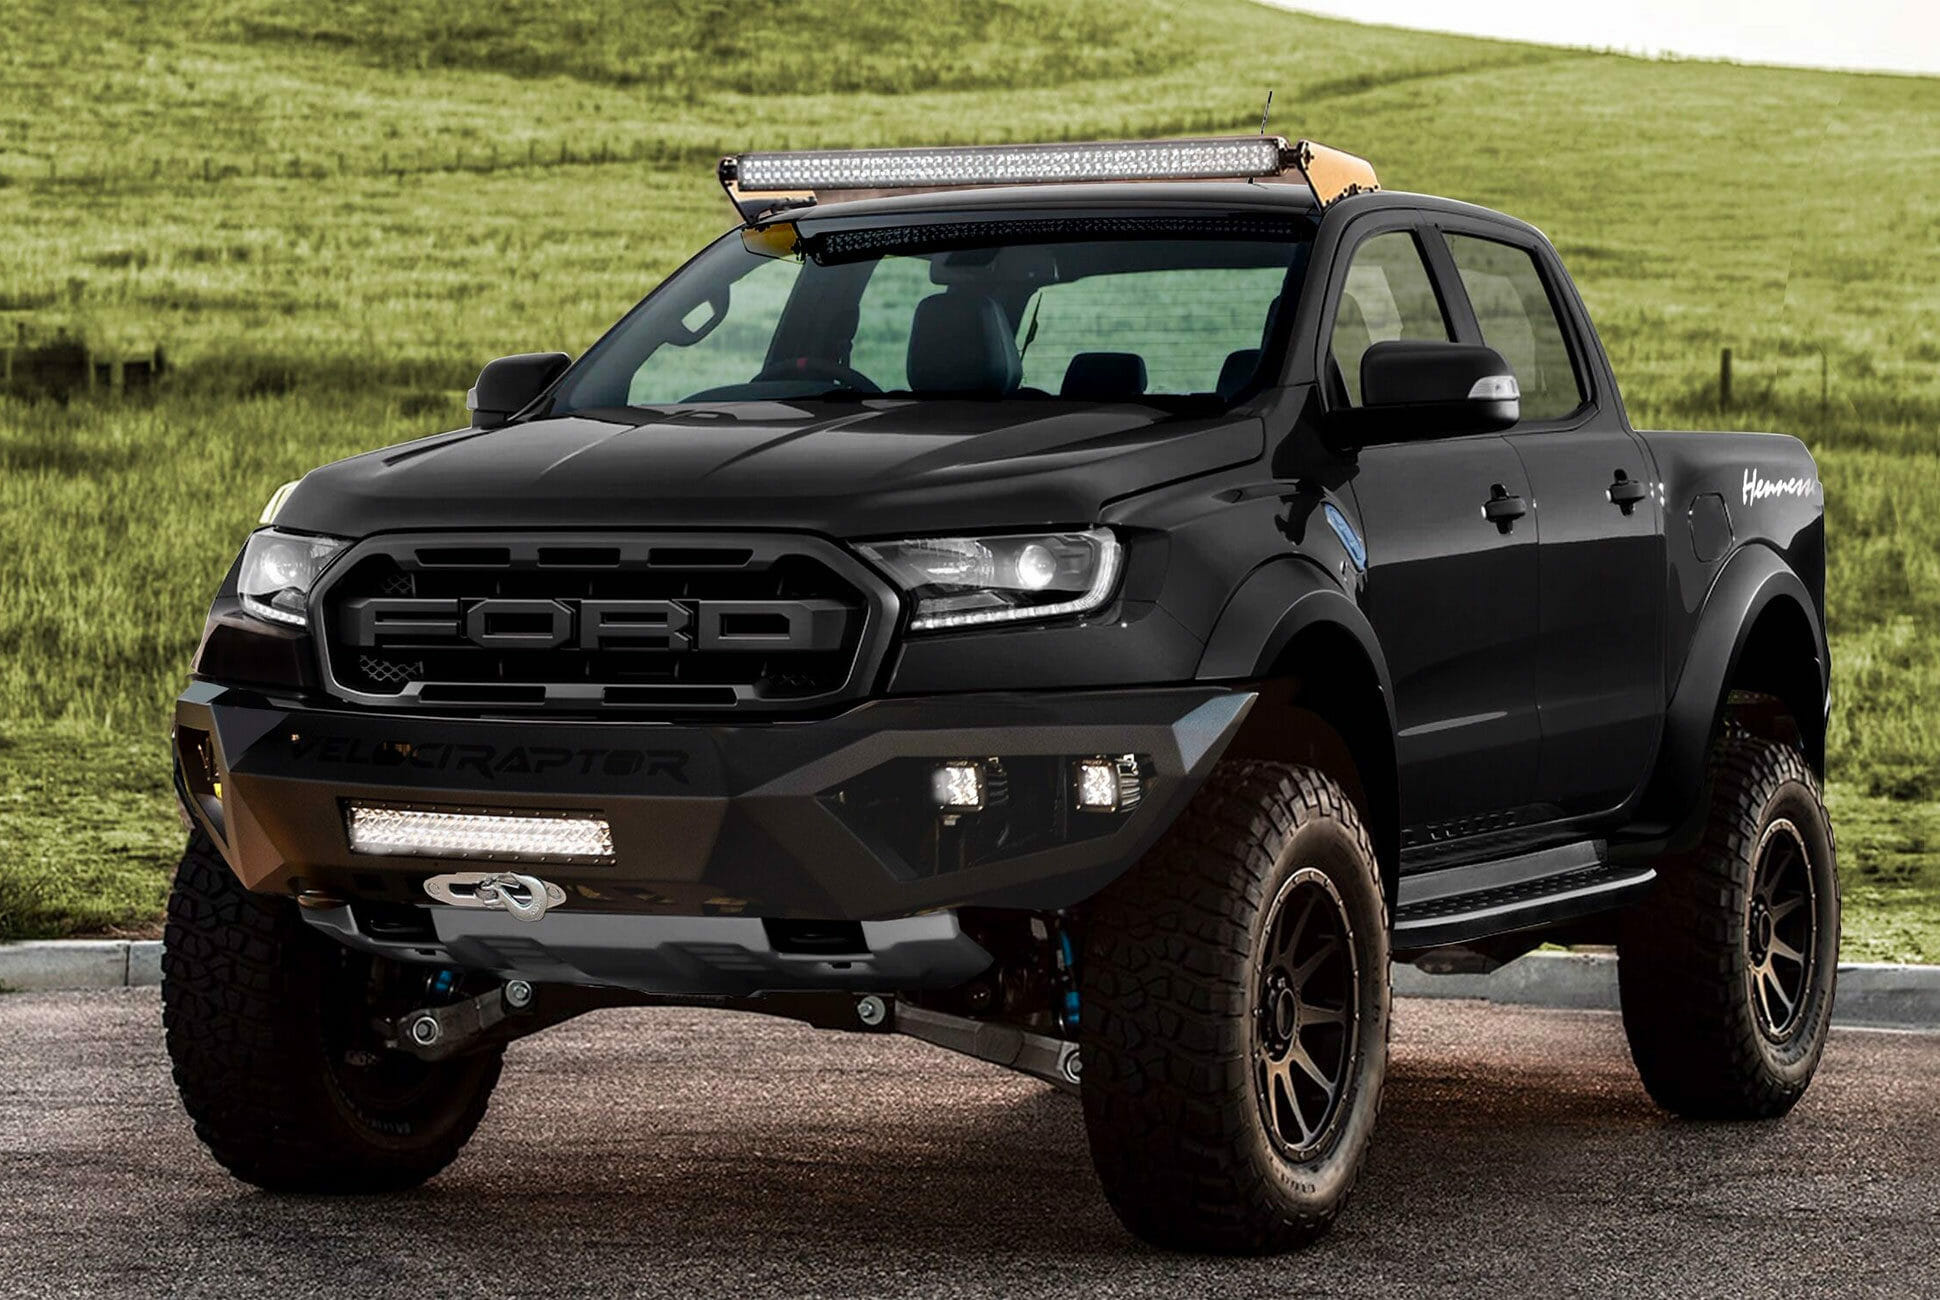 Ford Ranger Raptor 2.0 TDCi 213hp Fichiers Tuning Reprogrammation